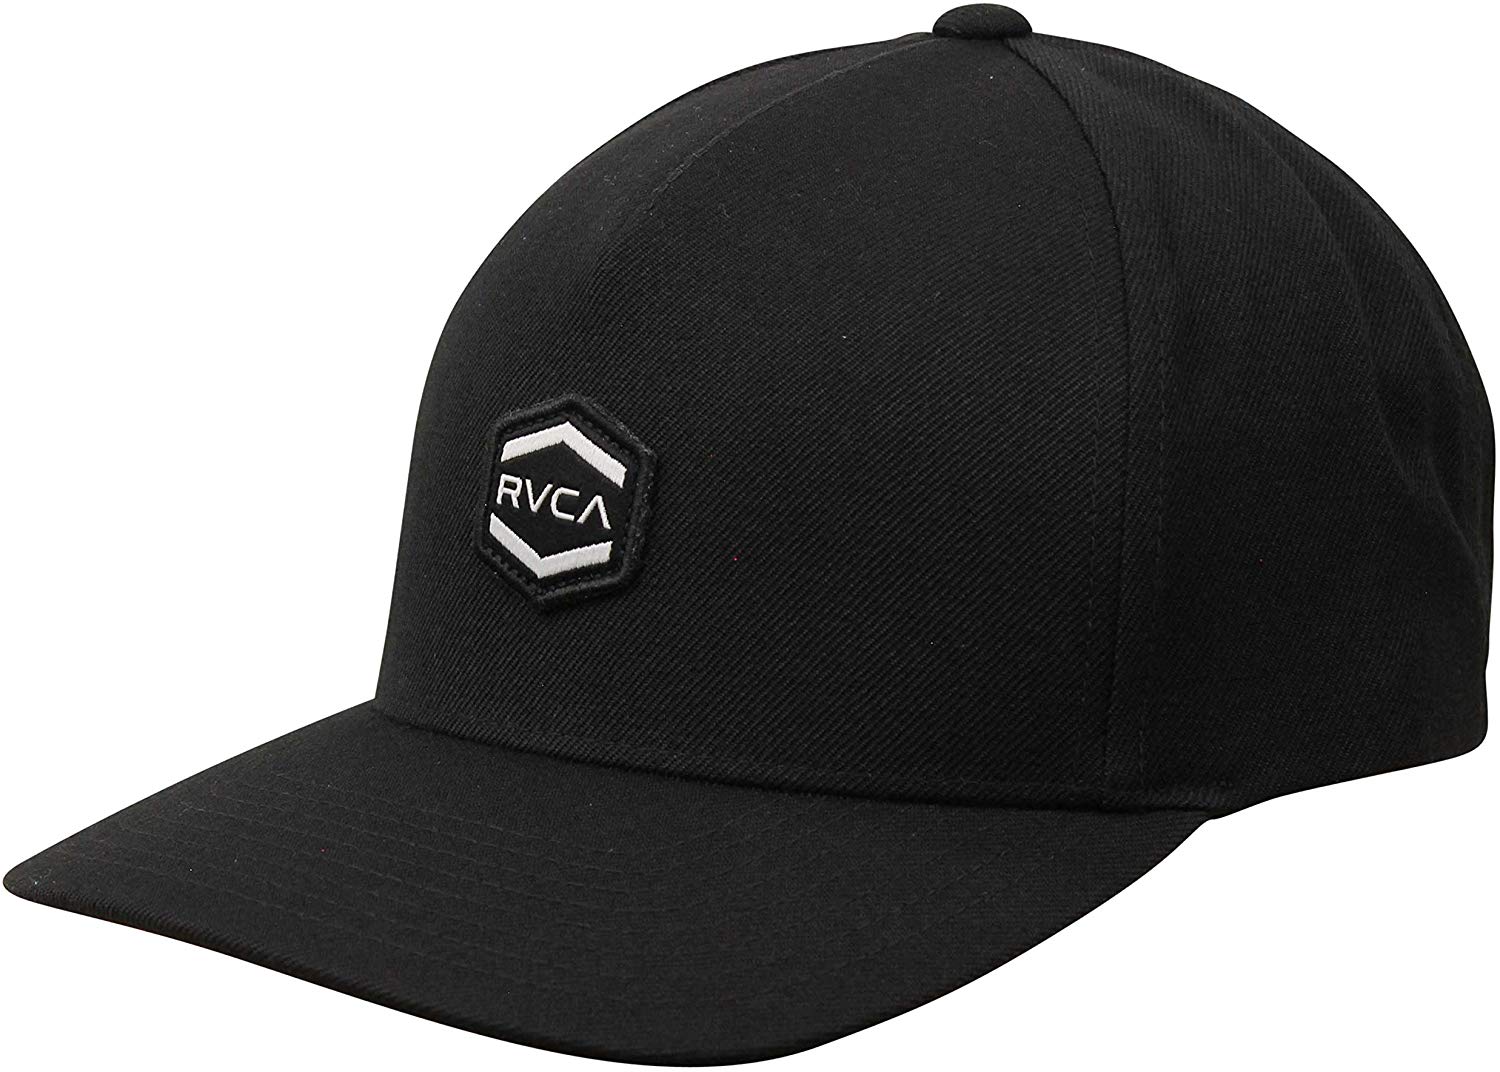 RVCA Airbourne Snapback Hat